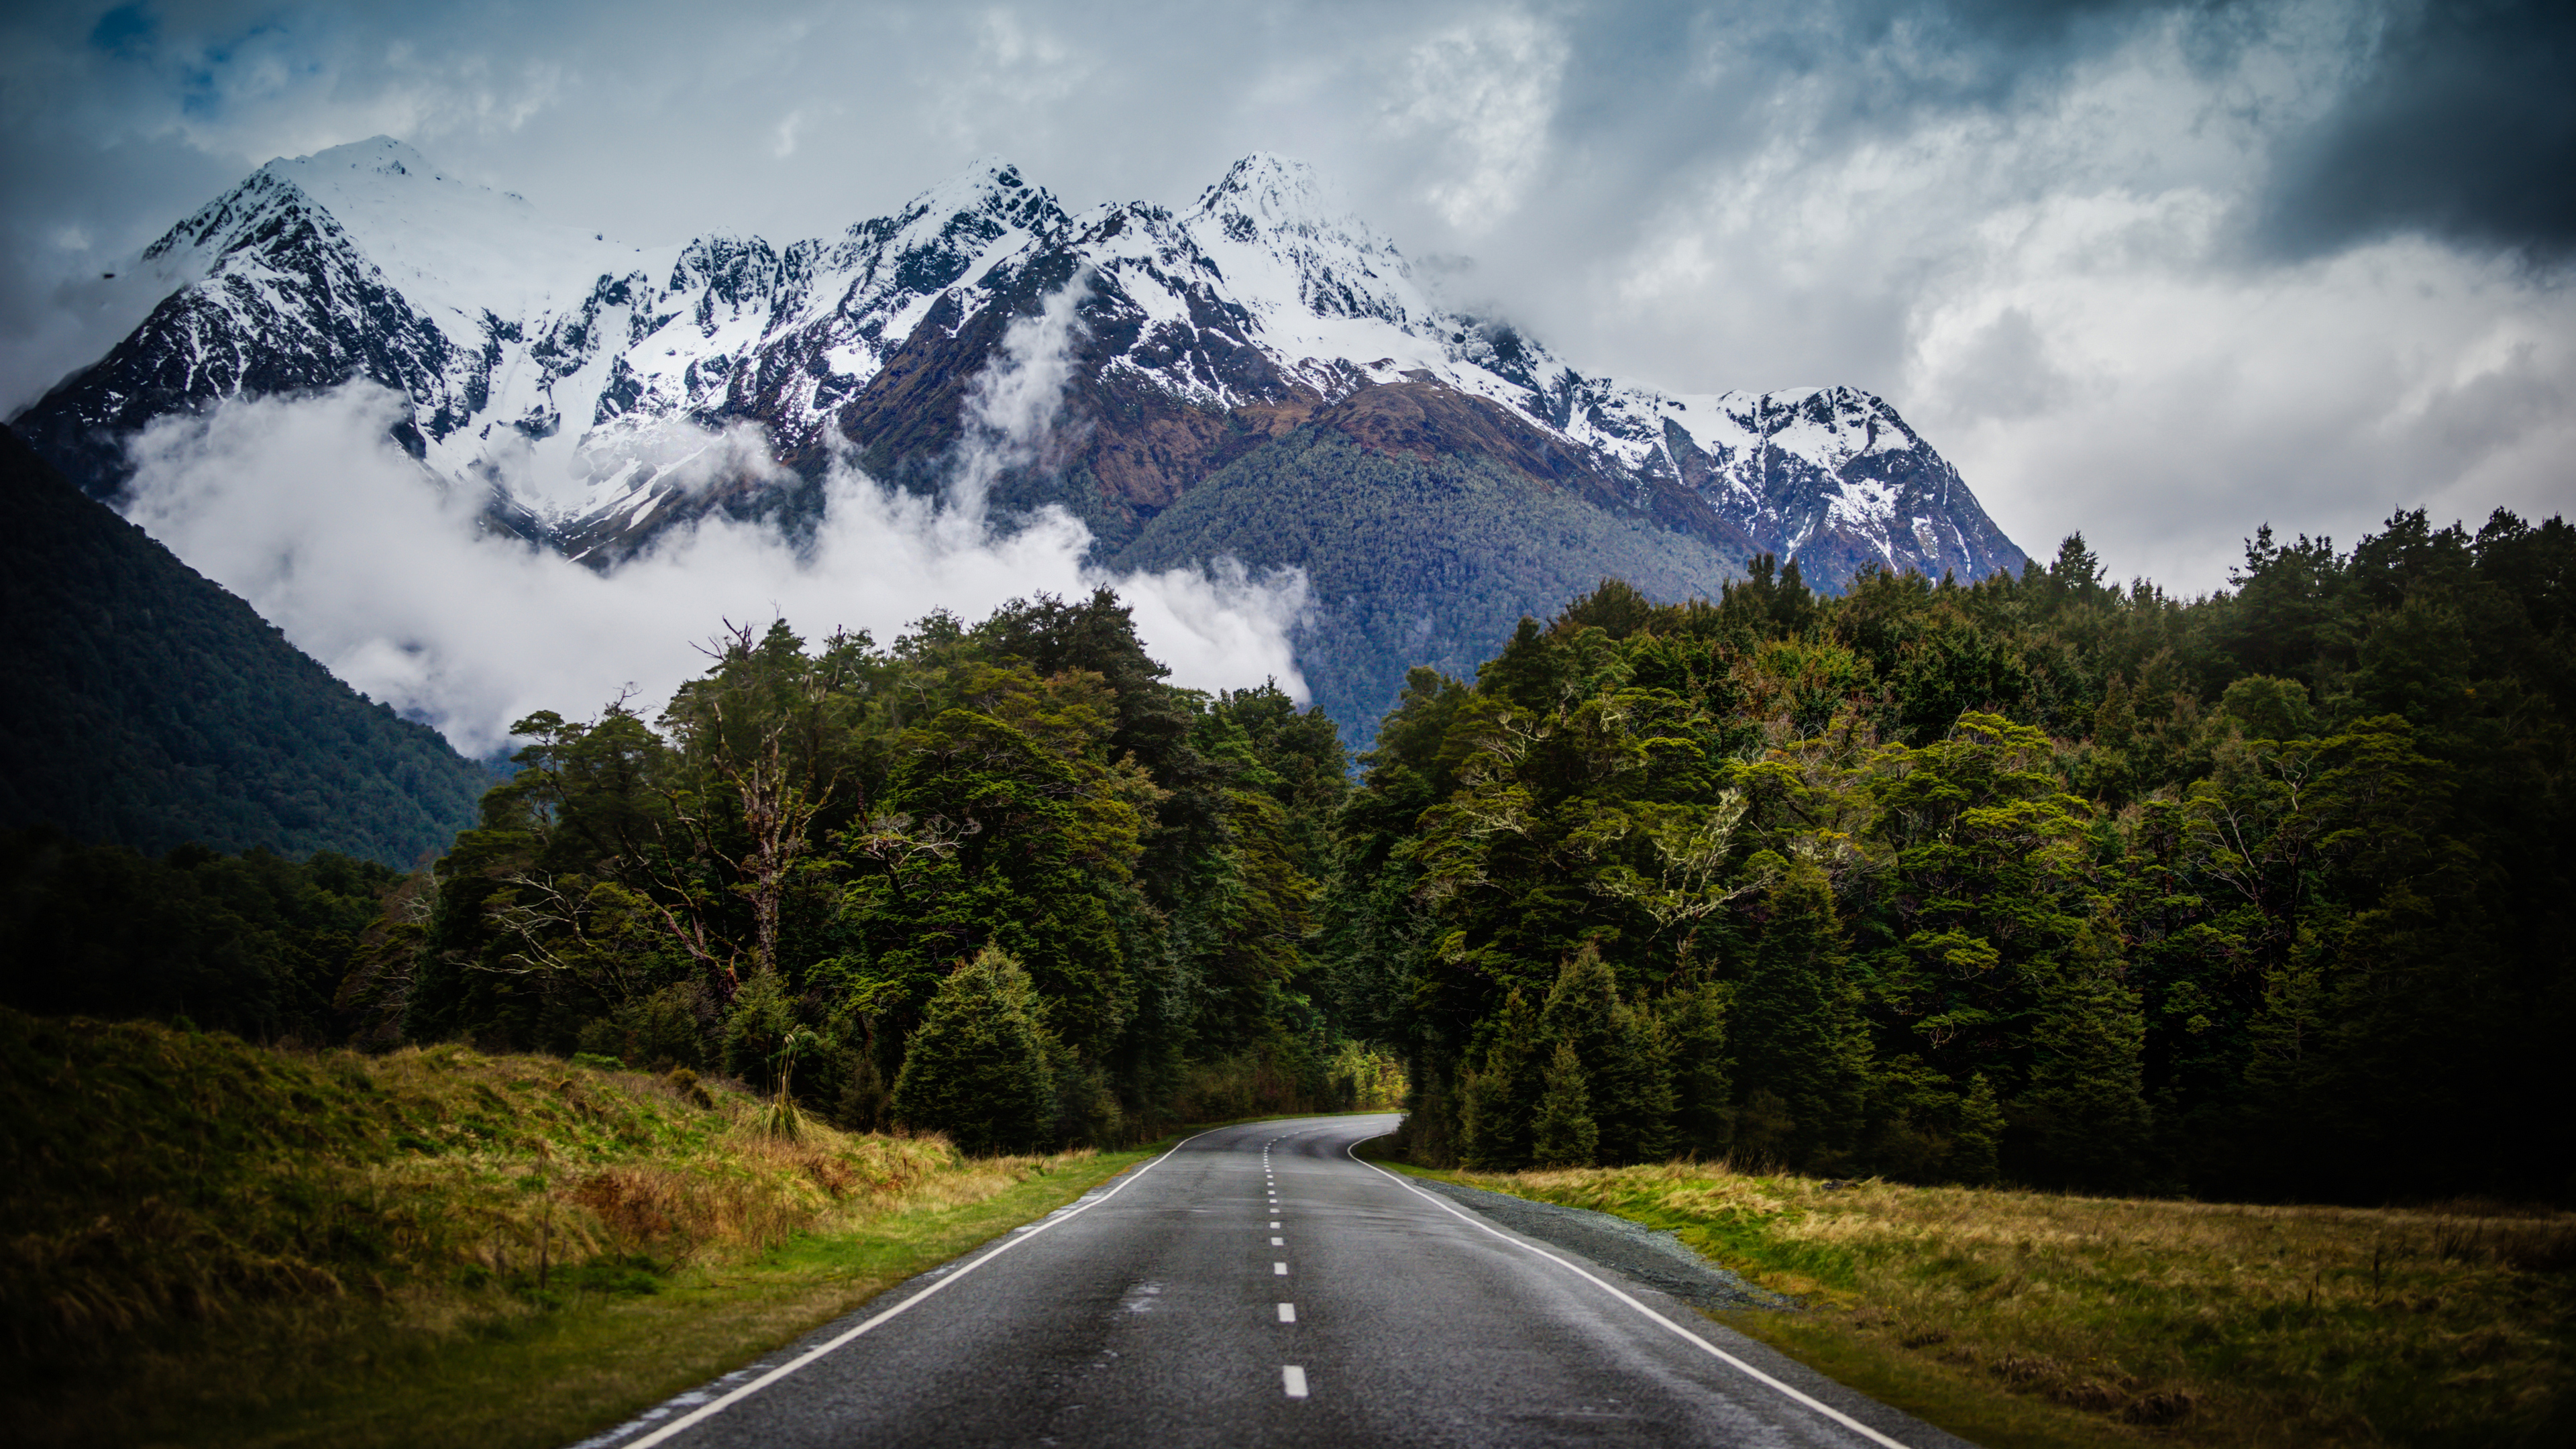 General 3840x2160 Trey Ratcliff photography landscape New Zealand nature mountains road snow trees clouds